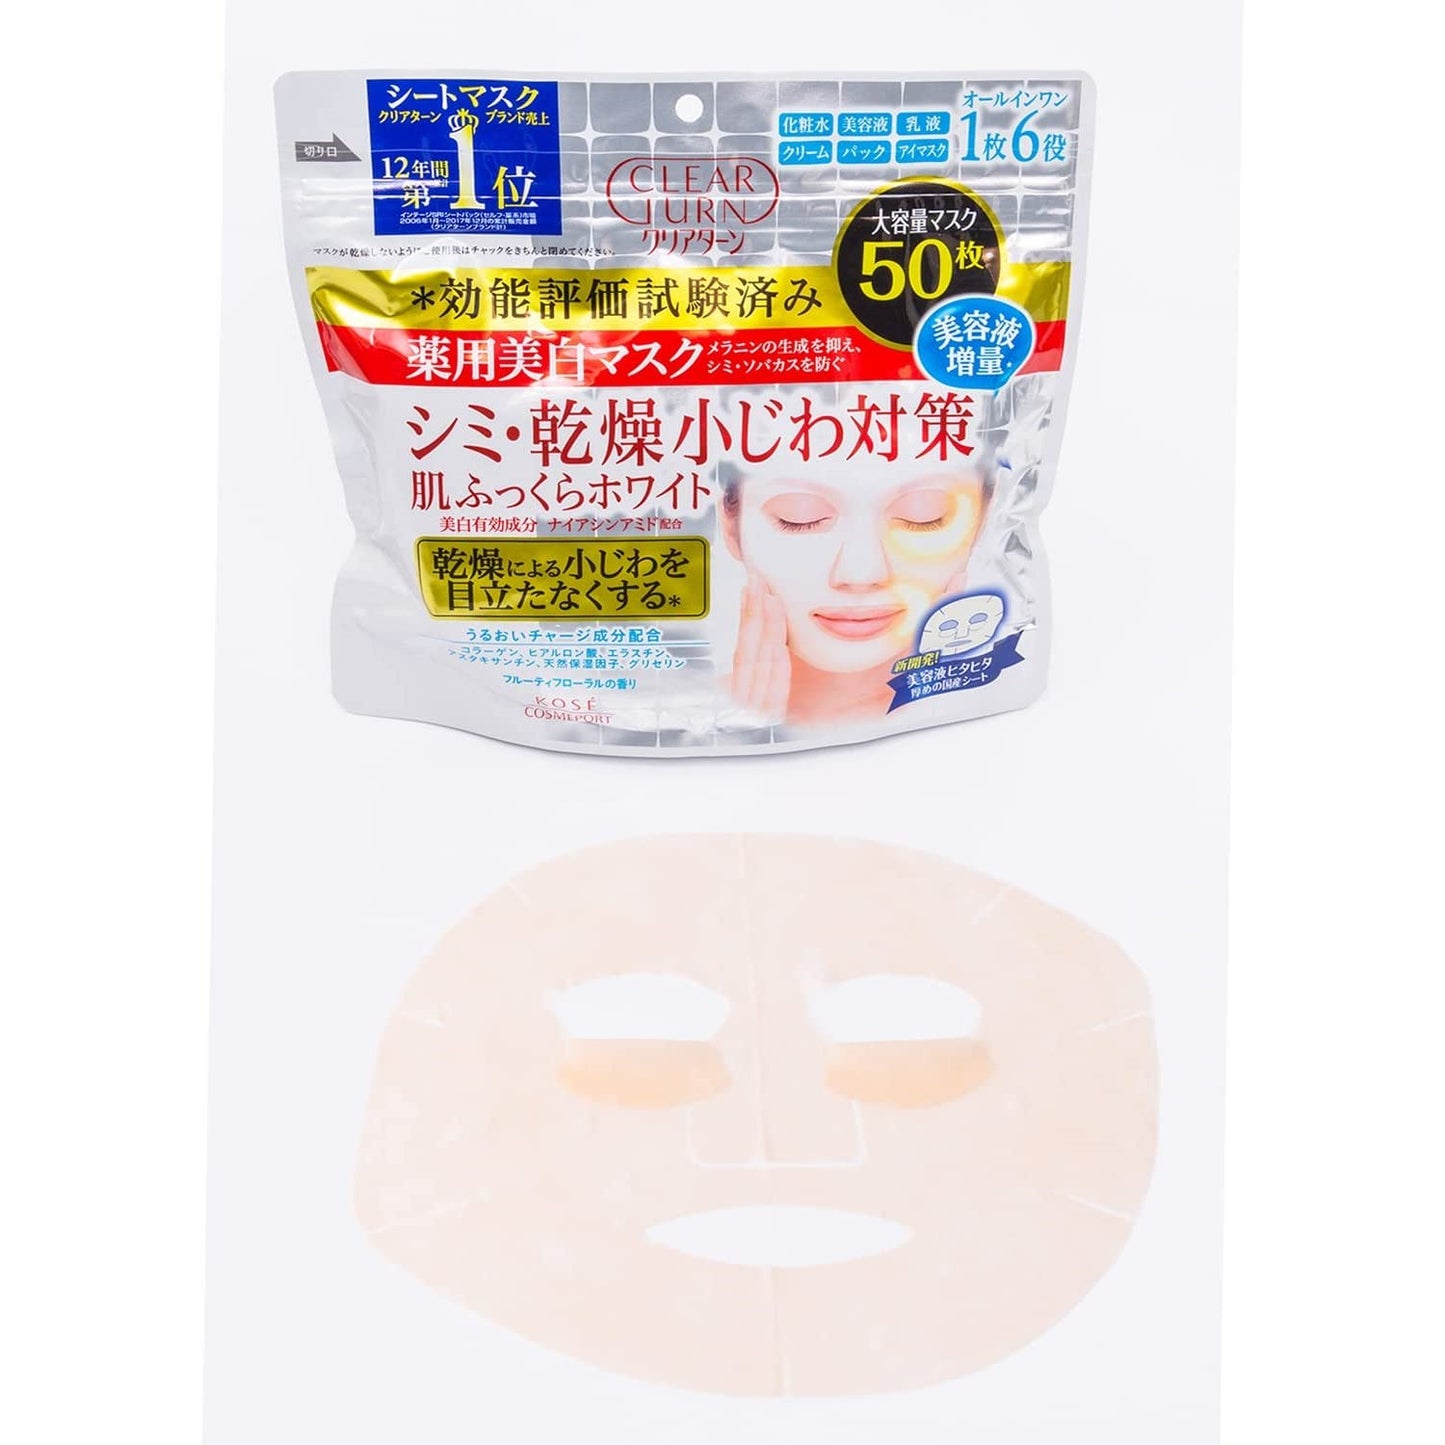 Kose Clear Turn Brightening Mask 50pcs (Made in Japan)